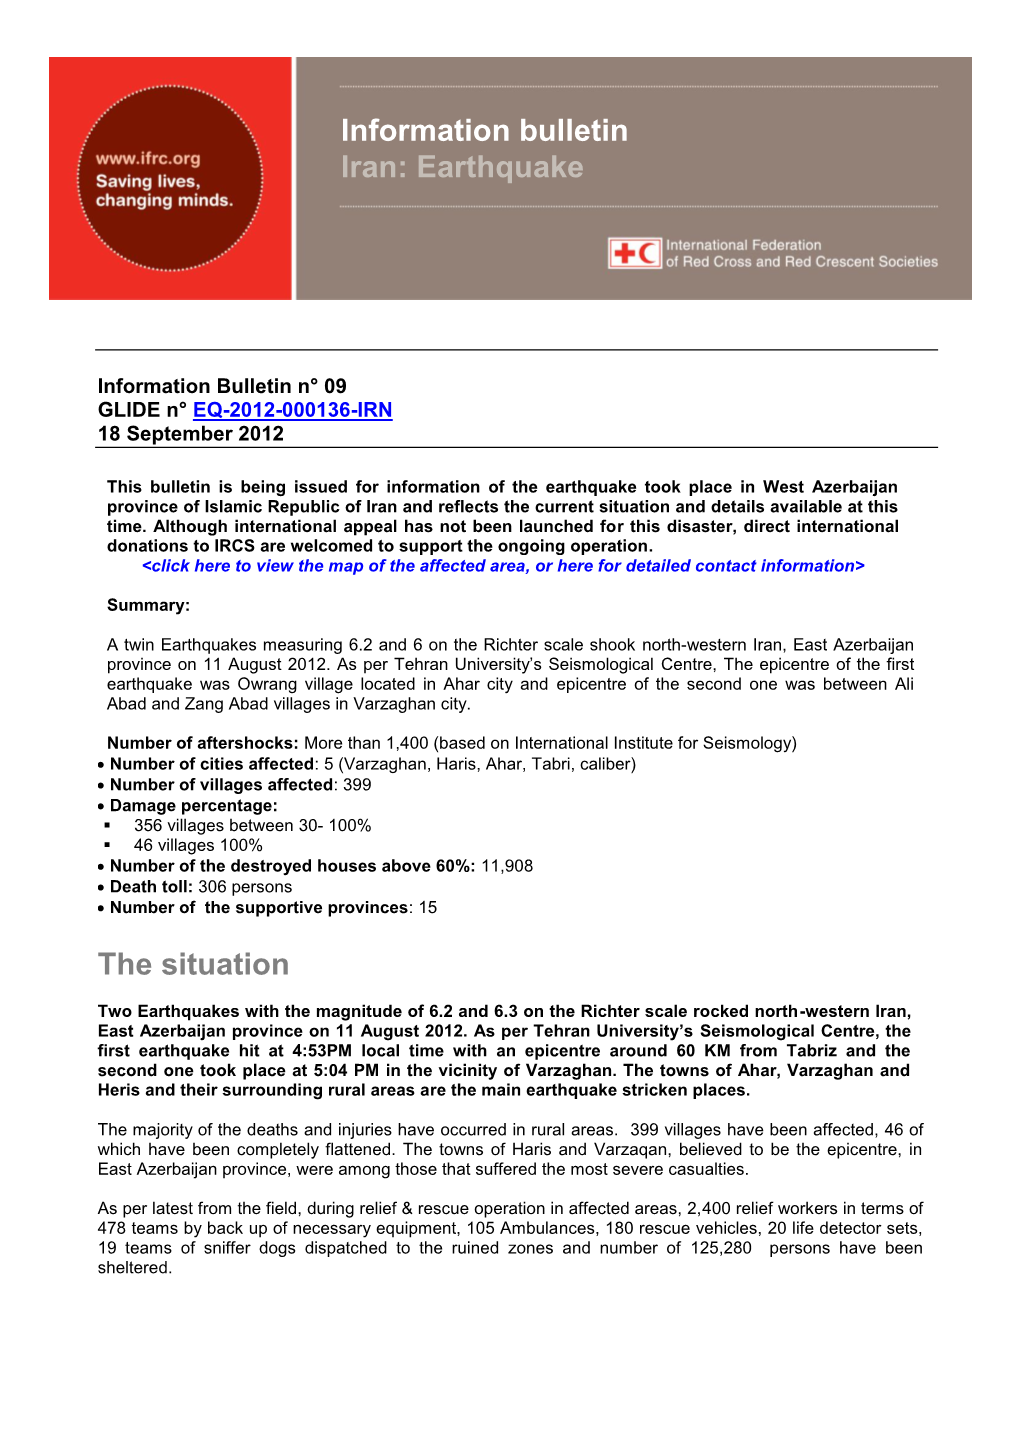 The Situation Information Bulletin Iran: Earthquake